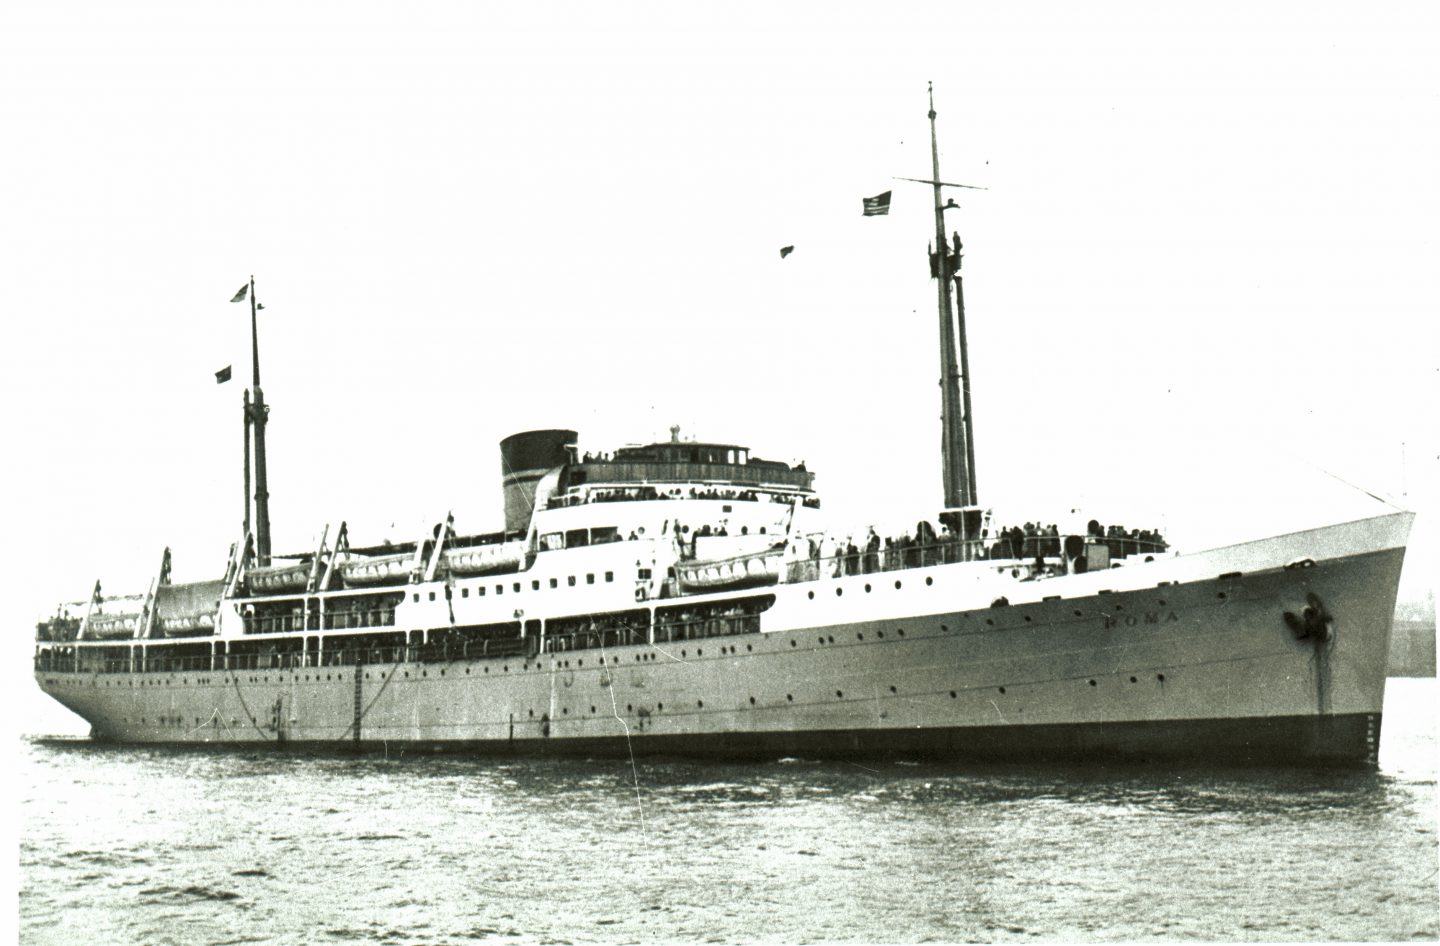 Medina was renamed Roma in 1949 and converted into a passenger ship. In 1950, during the Roman Catholic Holy Year, it was used to transport pilgrims to Rome, and afterwards carried emigrants to Australia.